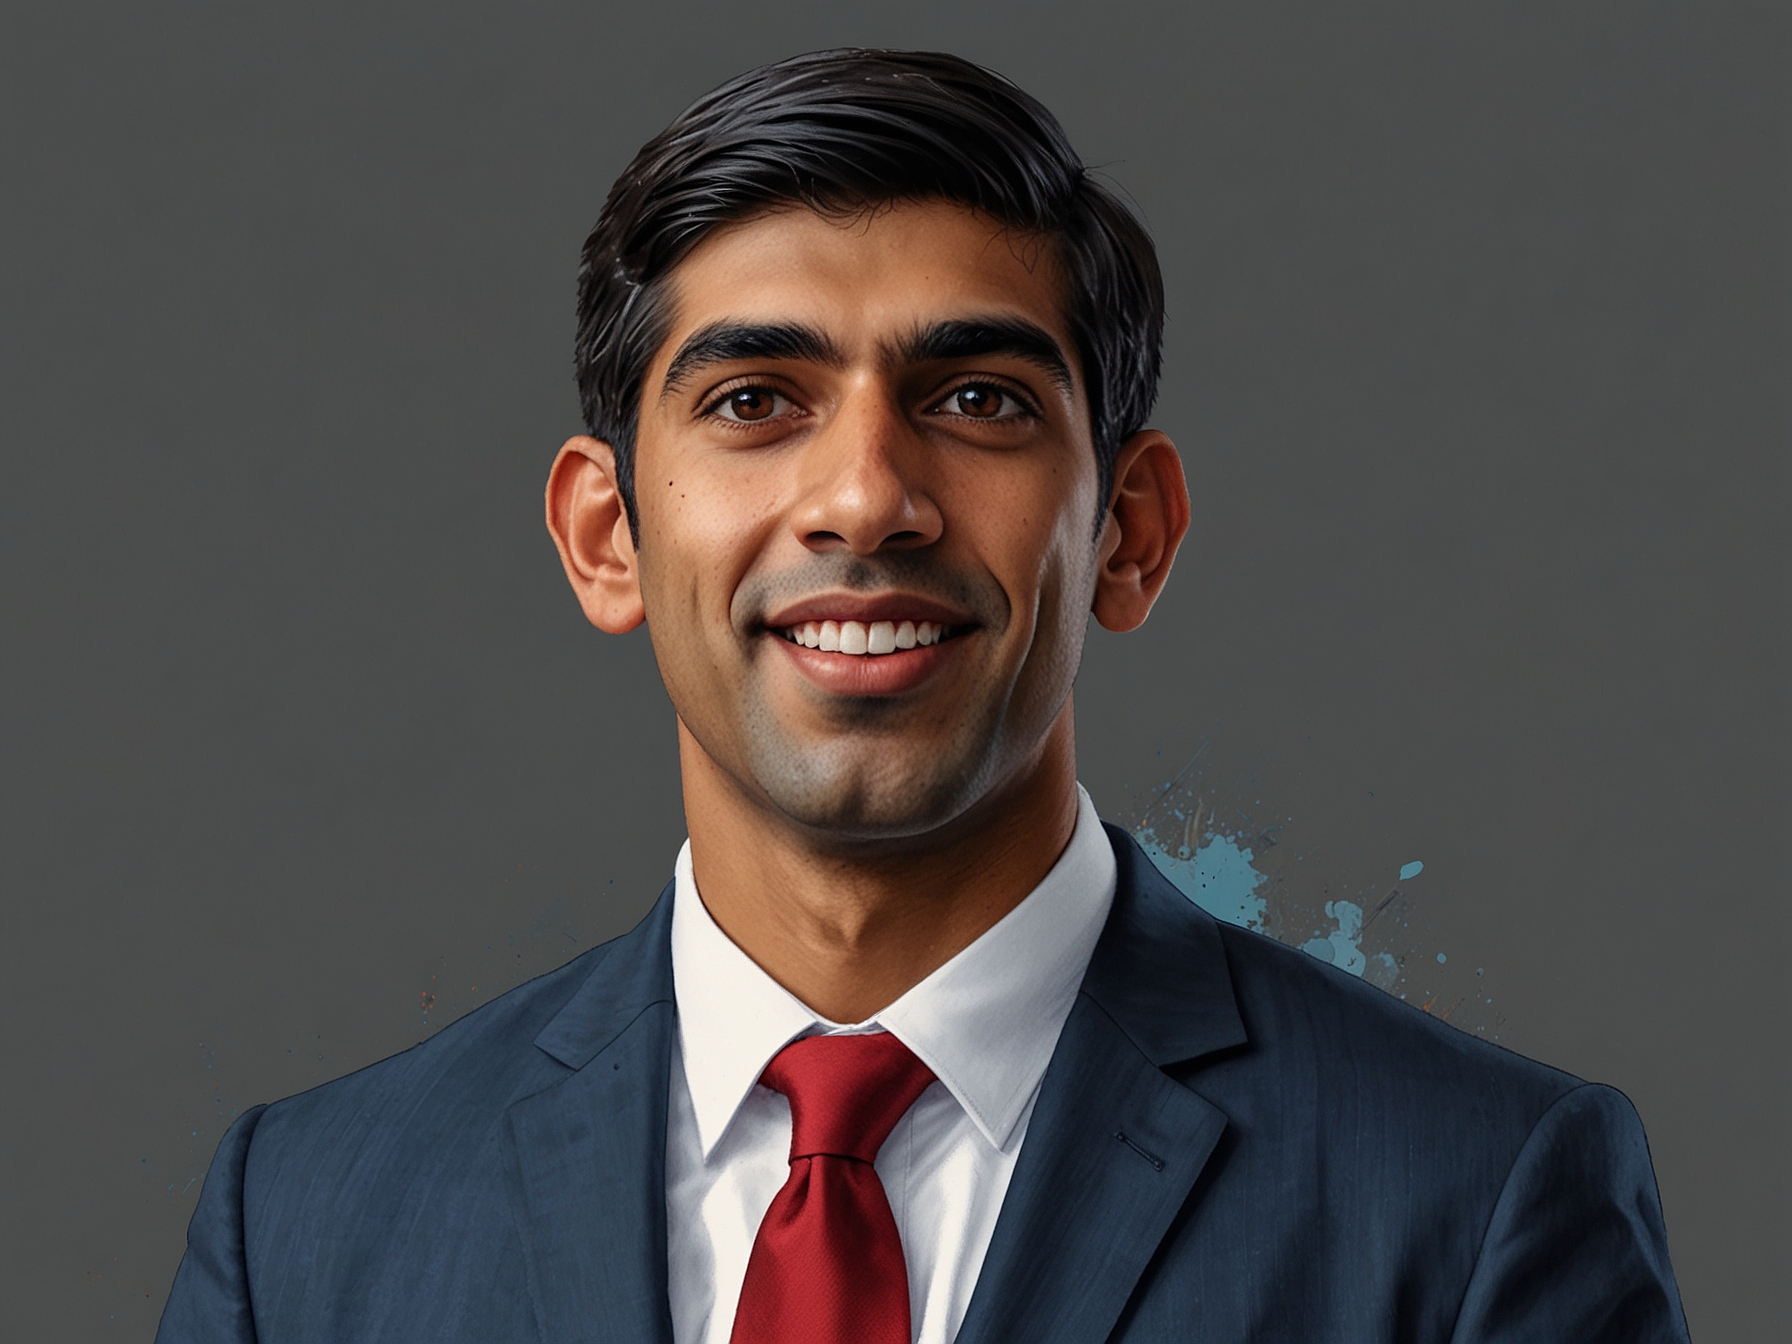 Rishi Sunak featured in a digital campaign, leveraging social media platforms with targeted ads and videos aimed at connecting with younger voters and highlighting his political message.